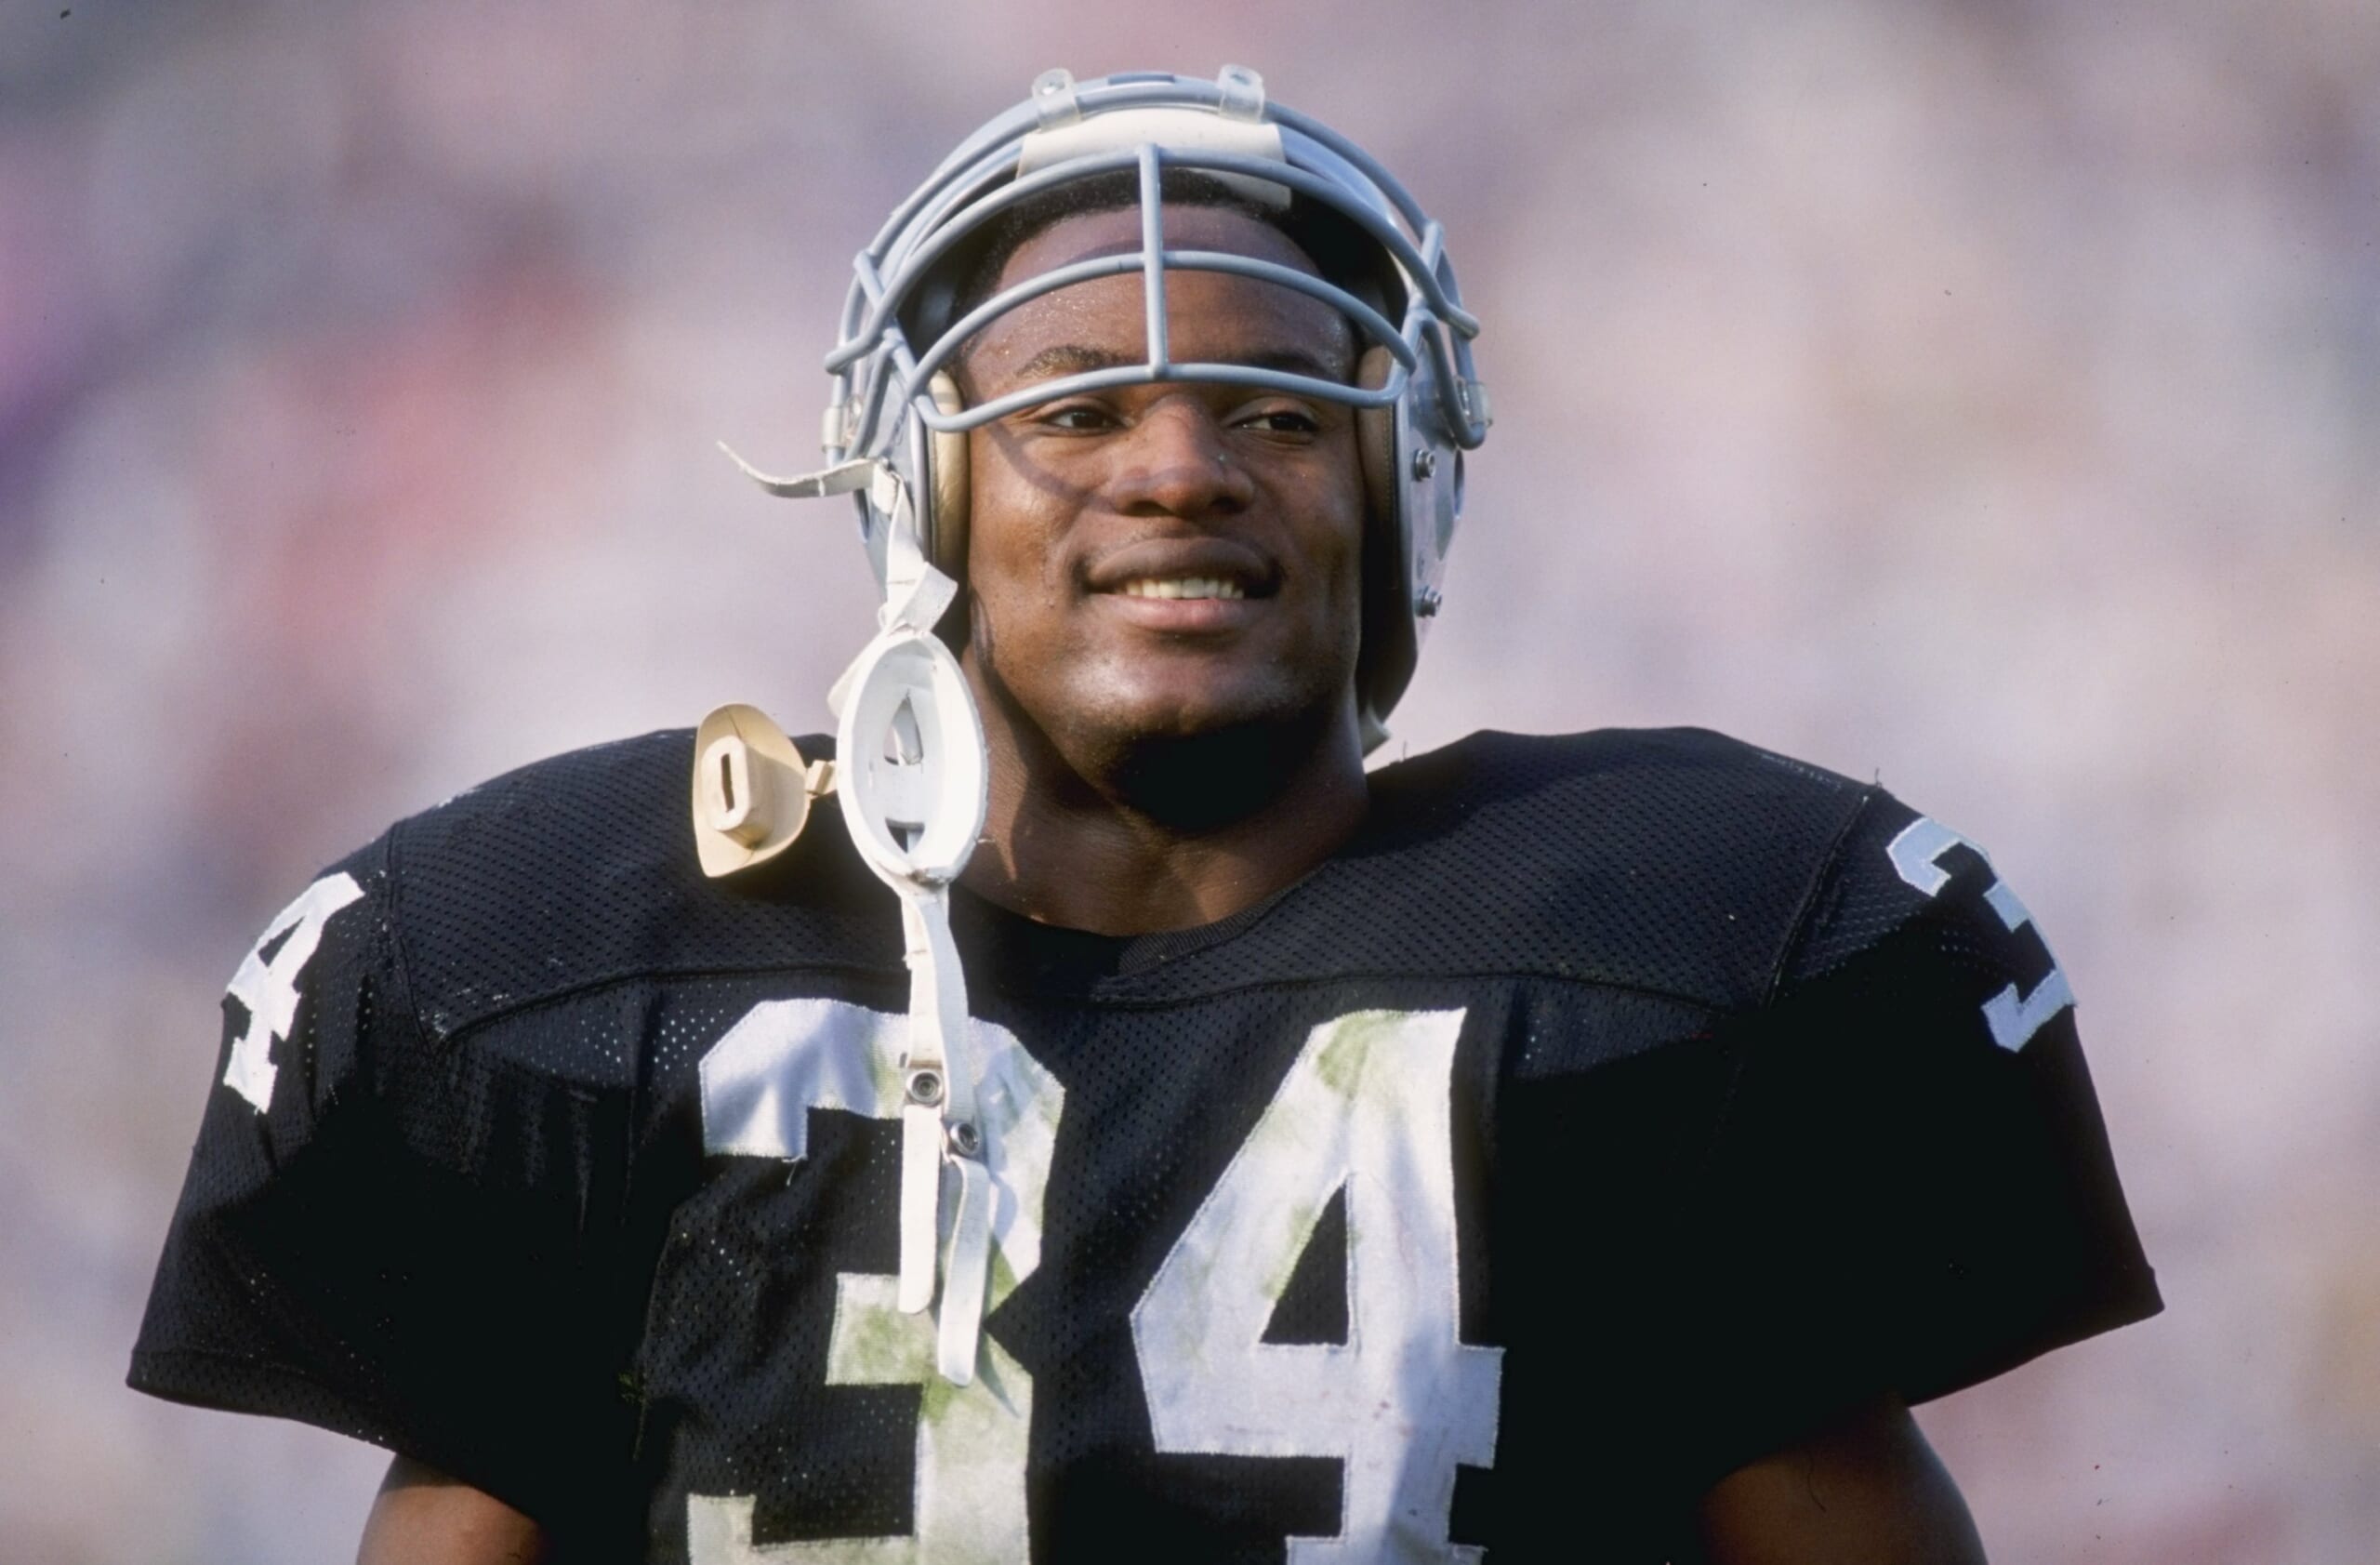 8 Bo Jackson Highlights That Prove He's the Greatest Athlete to Ever